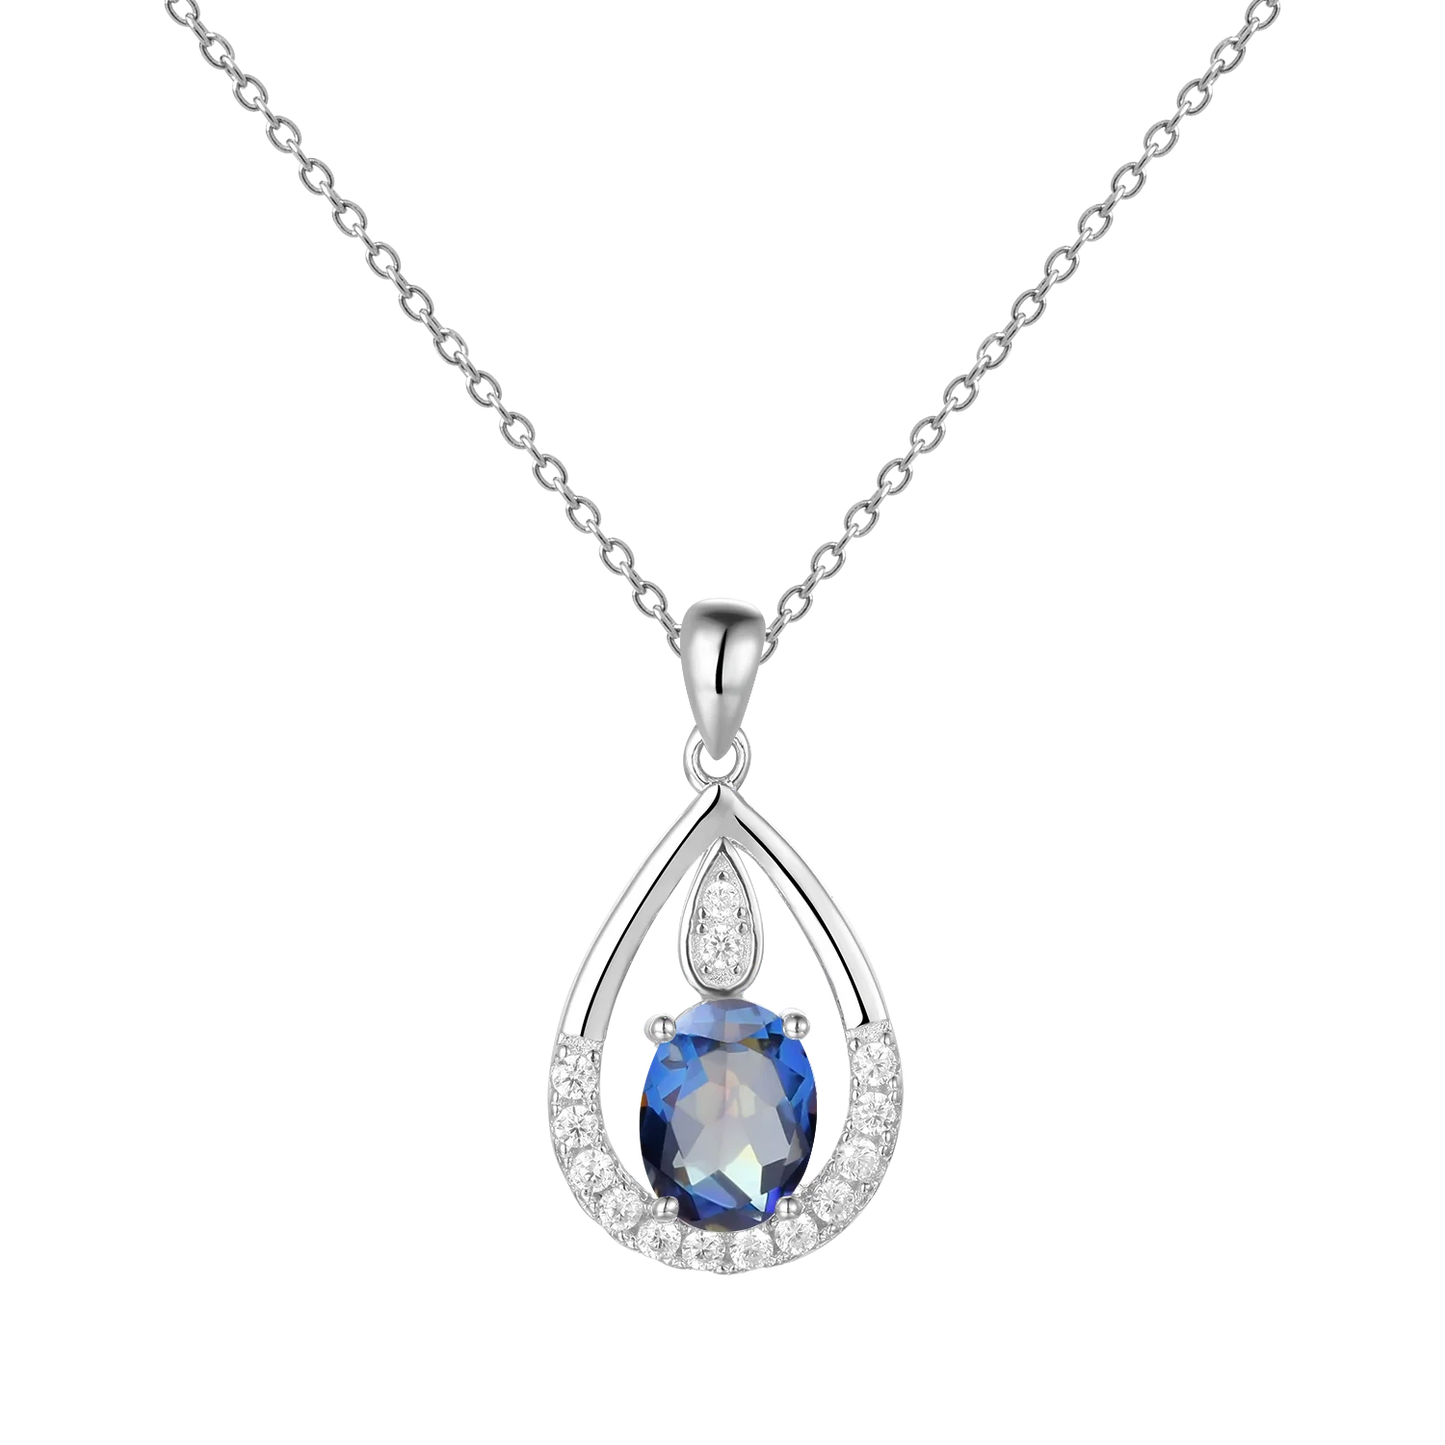 Gem's Ballet December Birthstone Topaz Necklace 6x8mm Oval Pink Topaz Pendant Necklace in 925 Sterling Silver with 18" Chain Blueish